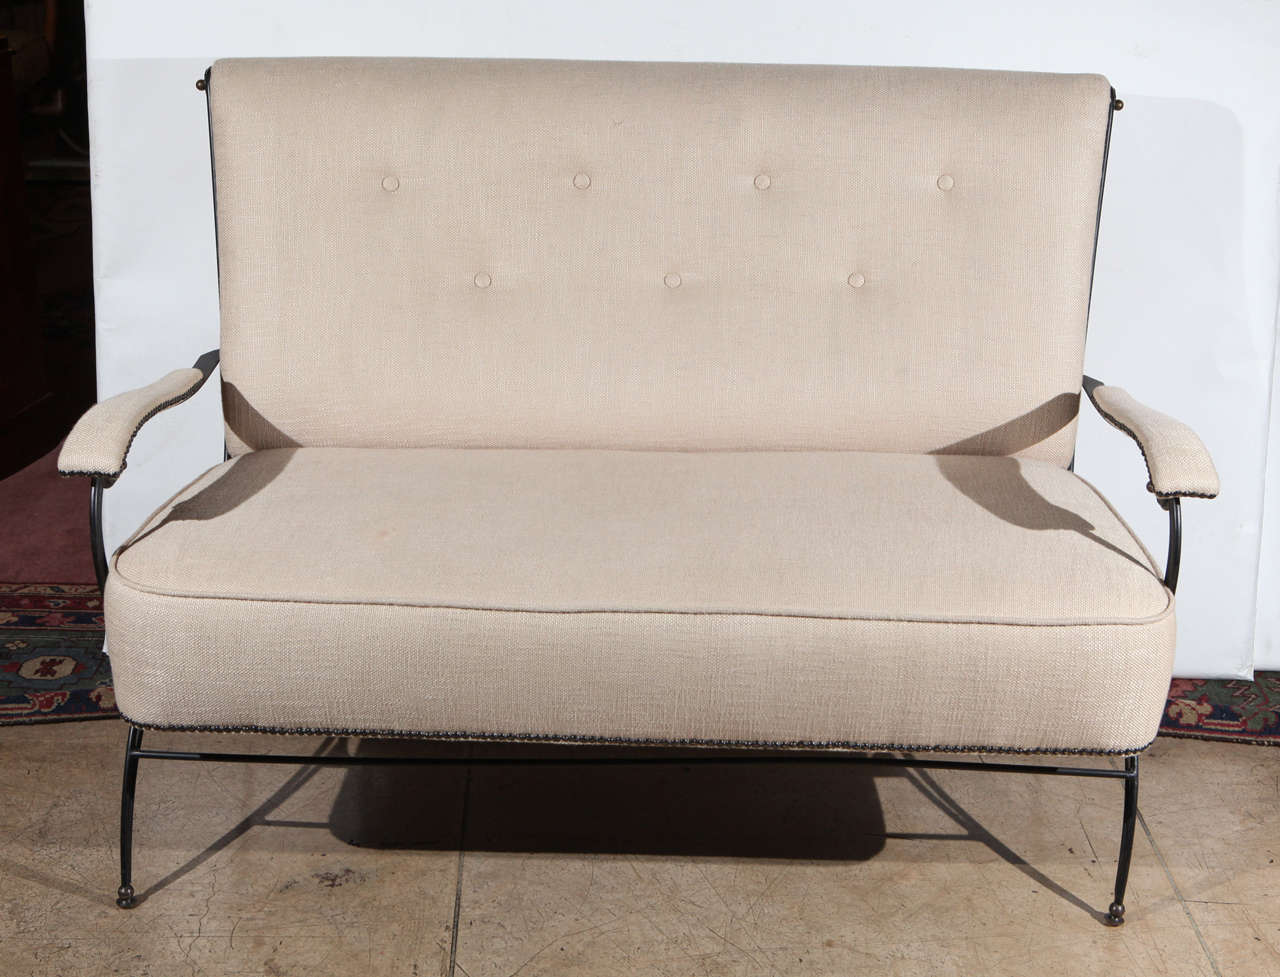 A graceful 1950s French settee in black wrought iron with brass details attributed to Jacques Adnet. Settee is newly upholstered in a cream colored chenille with black nail head details on arms and seat.